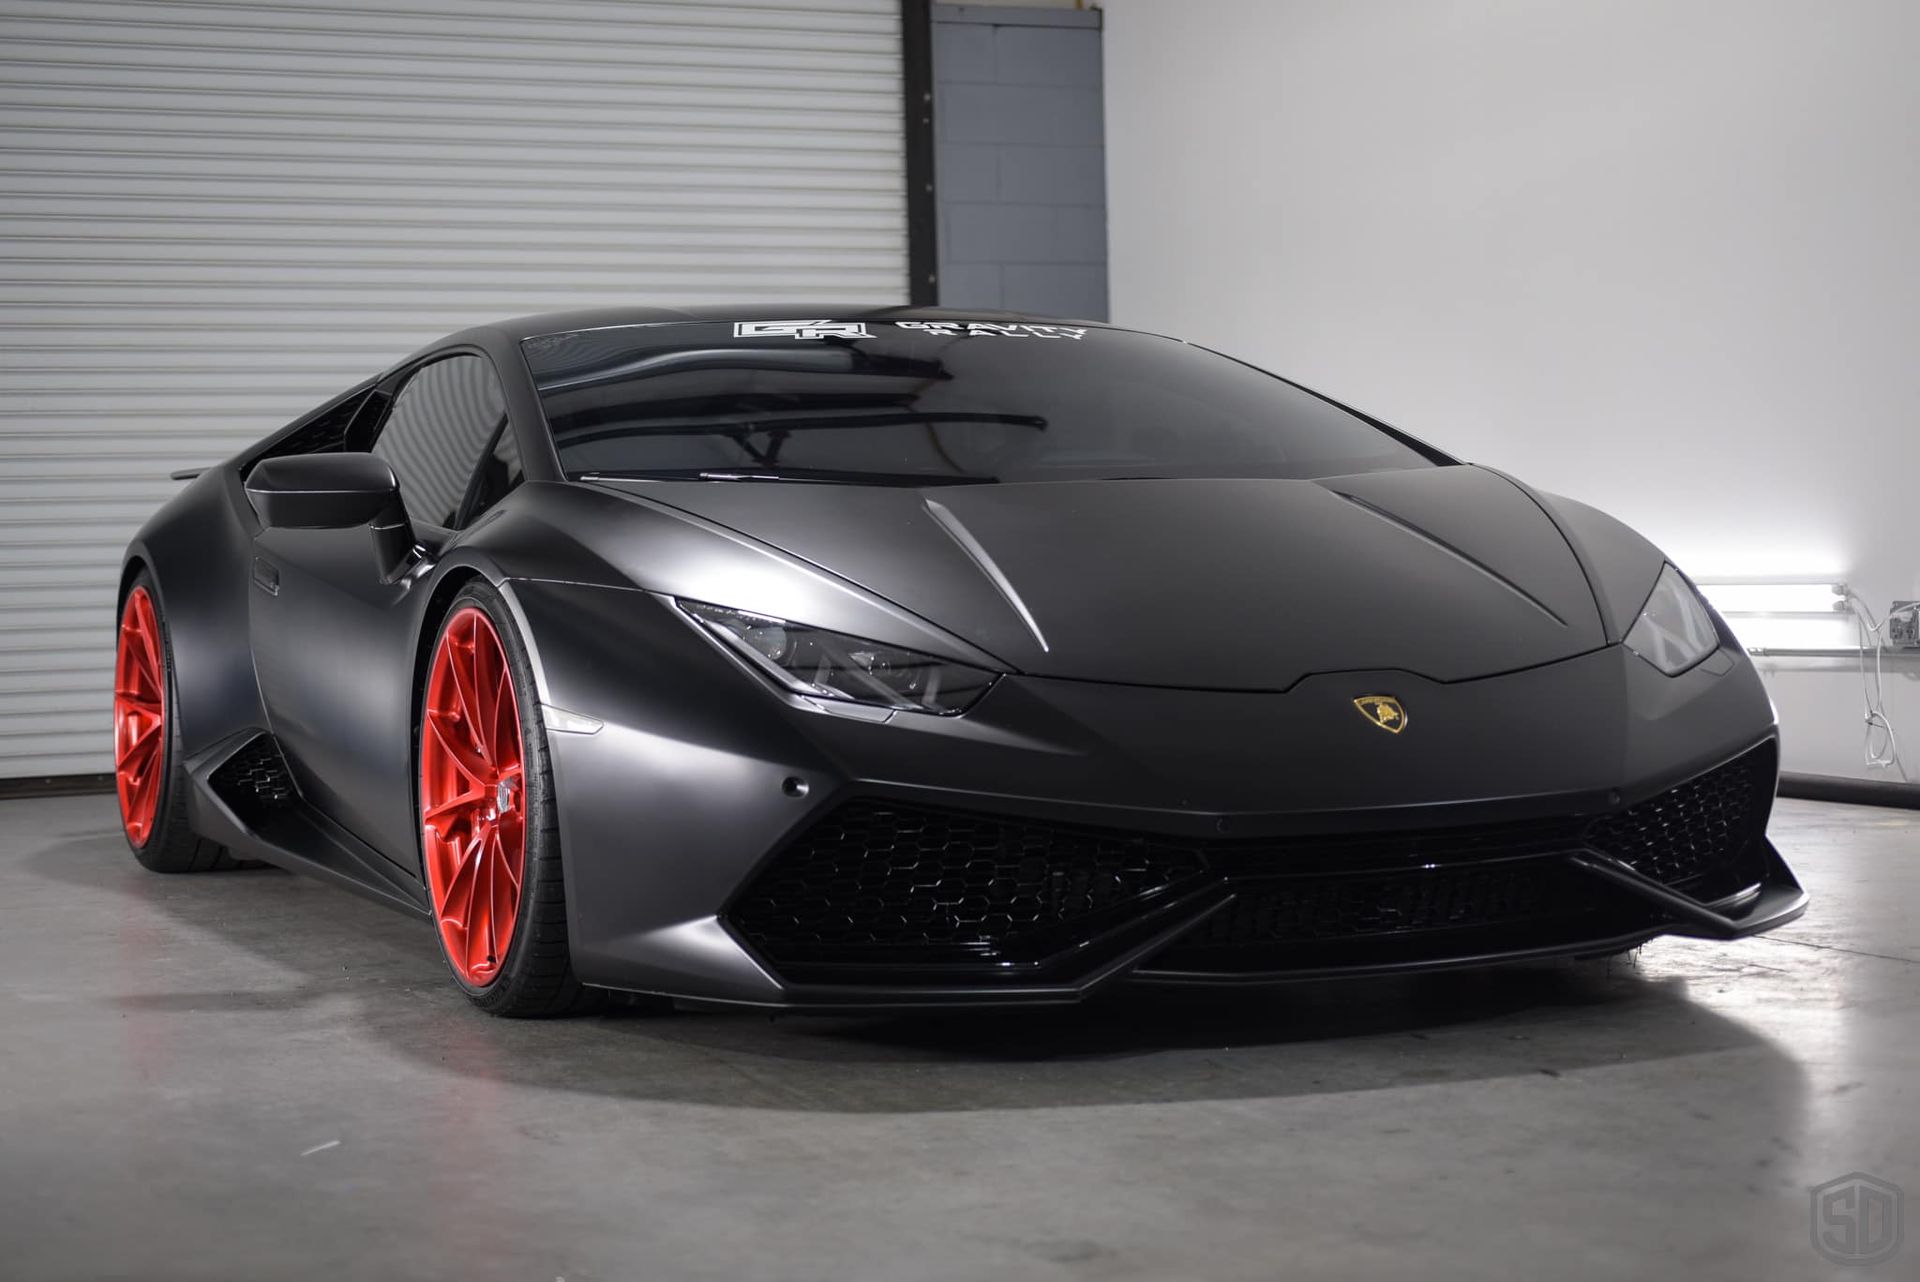 Check out this awe-inspiring, supercharged Lamborghini Huracan we corrected and protected a while ag